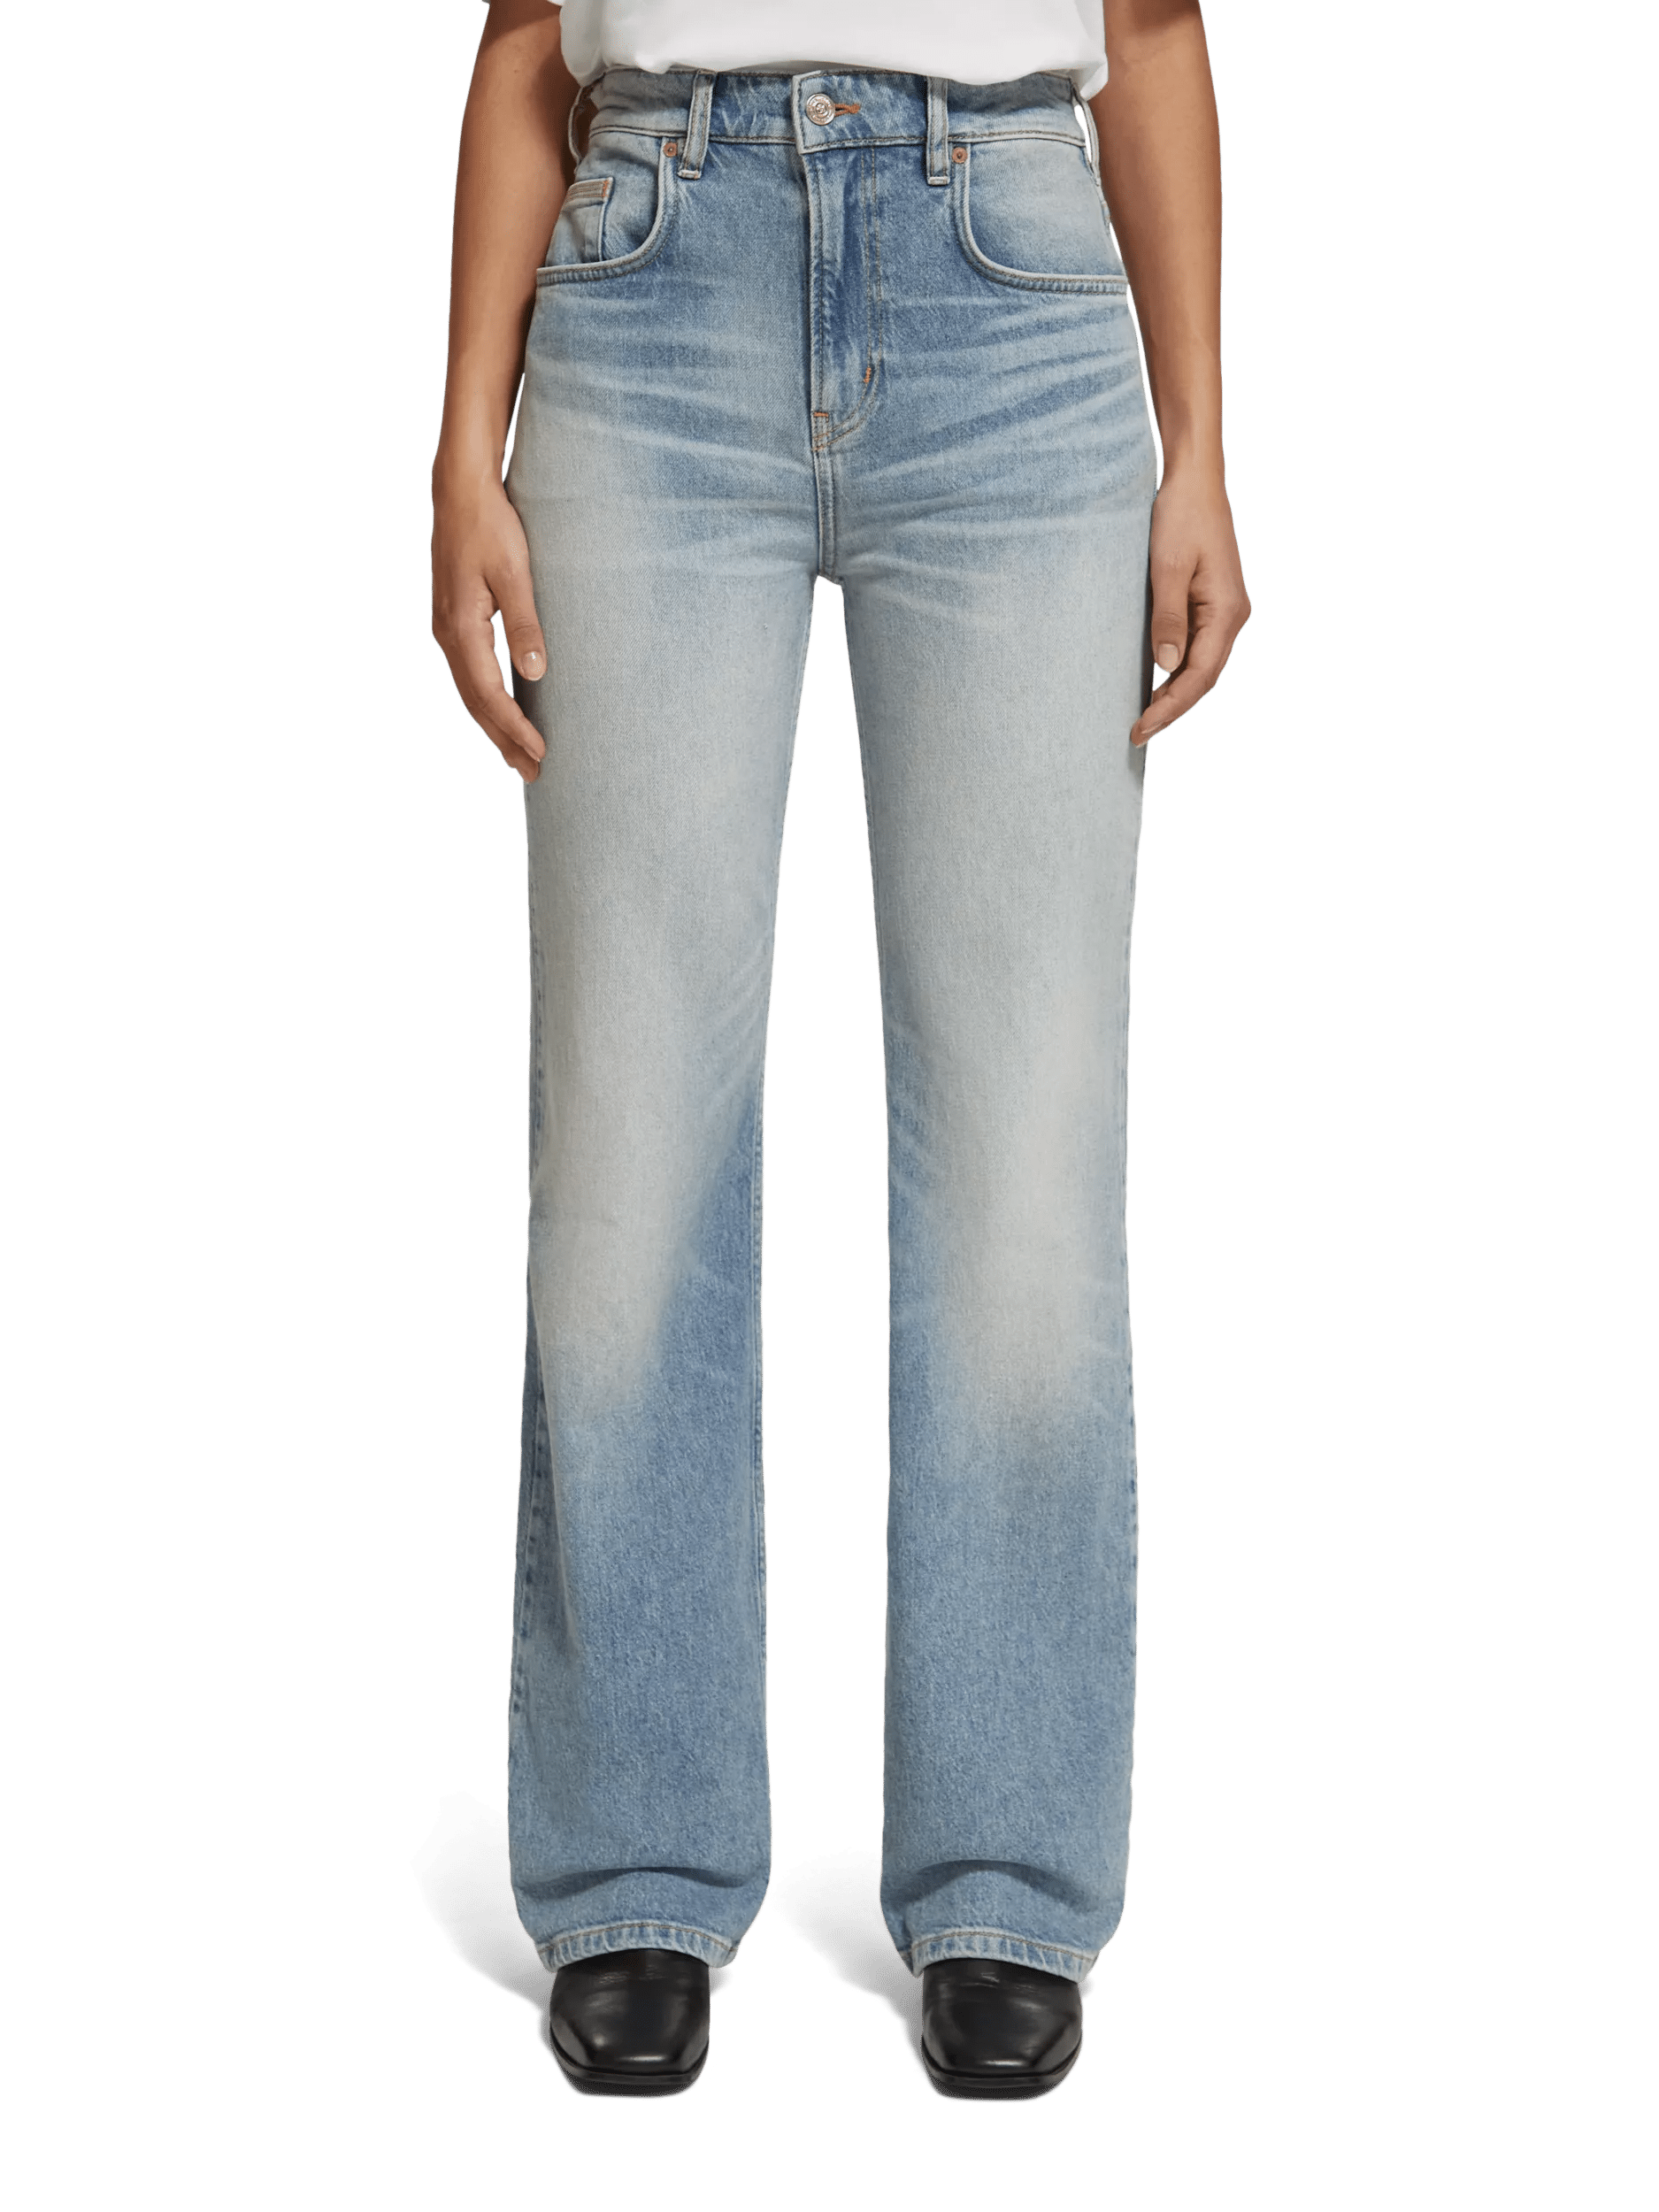 ZIZOCWA Flannel Lined Jeans Womens On Denim Women'S Jeans Stretch Denim  Lace-Up Slim Casual High-Waist Trousers Trousers Pants Button Up Jean Shirt  Women 